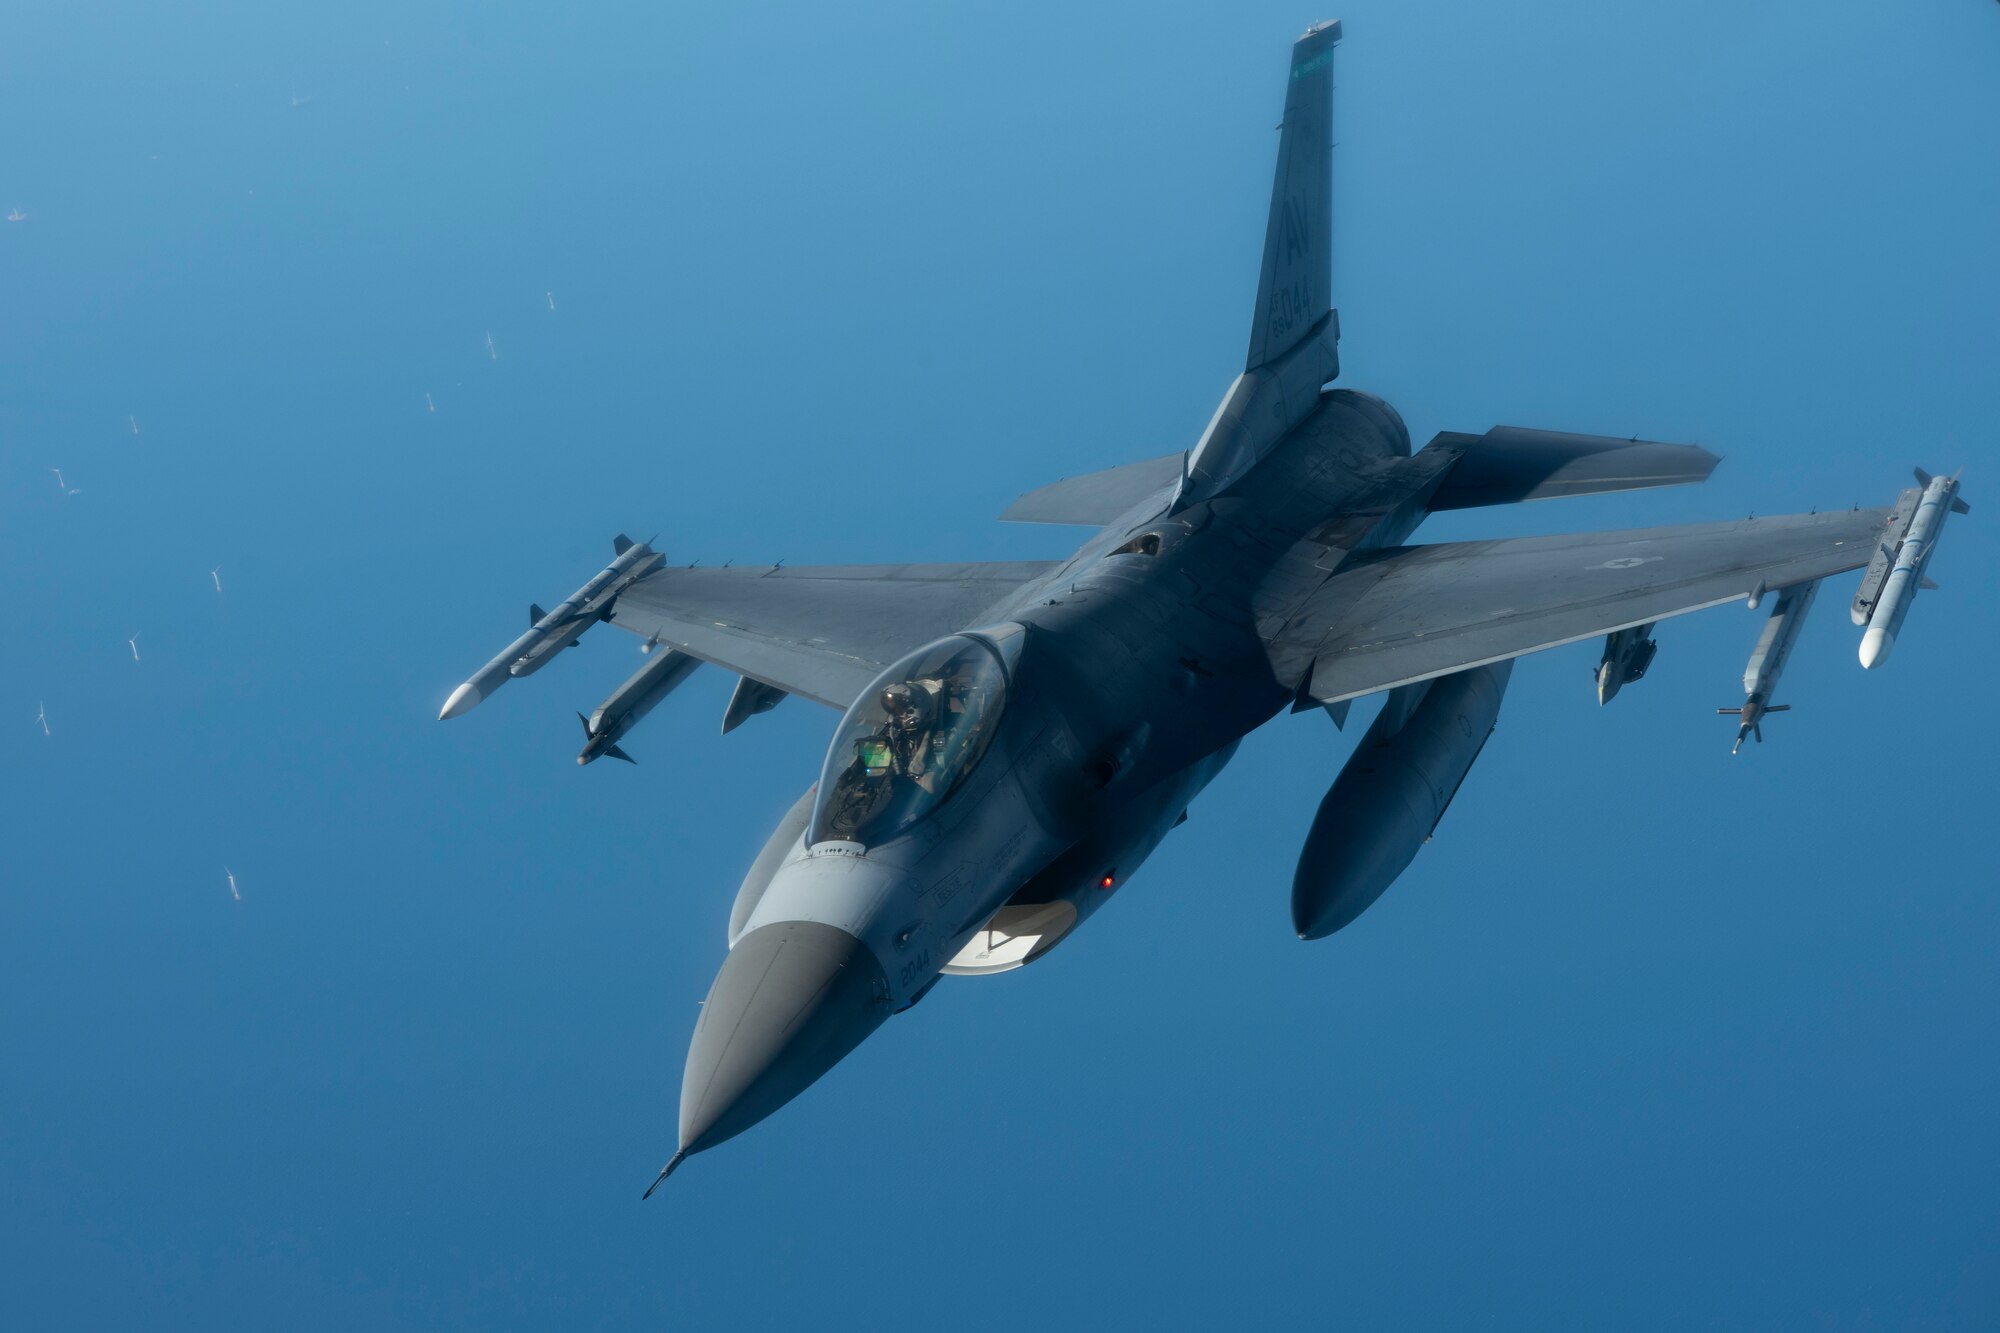 A U.S. Air Force F-16C Fighting Falcon aircraft assigned to the 31st Fighter Wing departs after receiving fuel from a KC-135 Stratotanker aircraft assigned to the 100th Air Refueling Wing over the North Sea during exercise Cobra Warrior 22, Sept. 21, 2022. The partnerships created through recurring training events like Cobra Warrior, better support the ability to employ a strategic force in theater whenever called upon. (U.S. Air Force photo by Tech. Sgt. Anthony Hetlage)